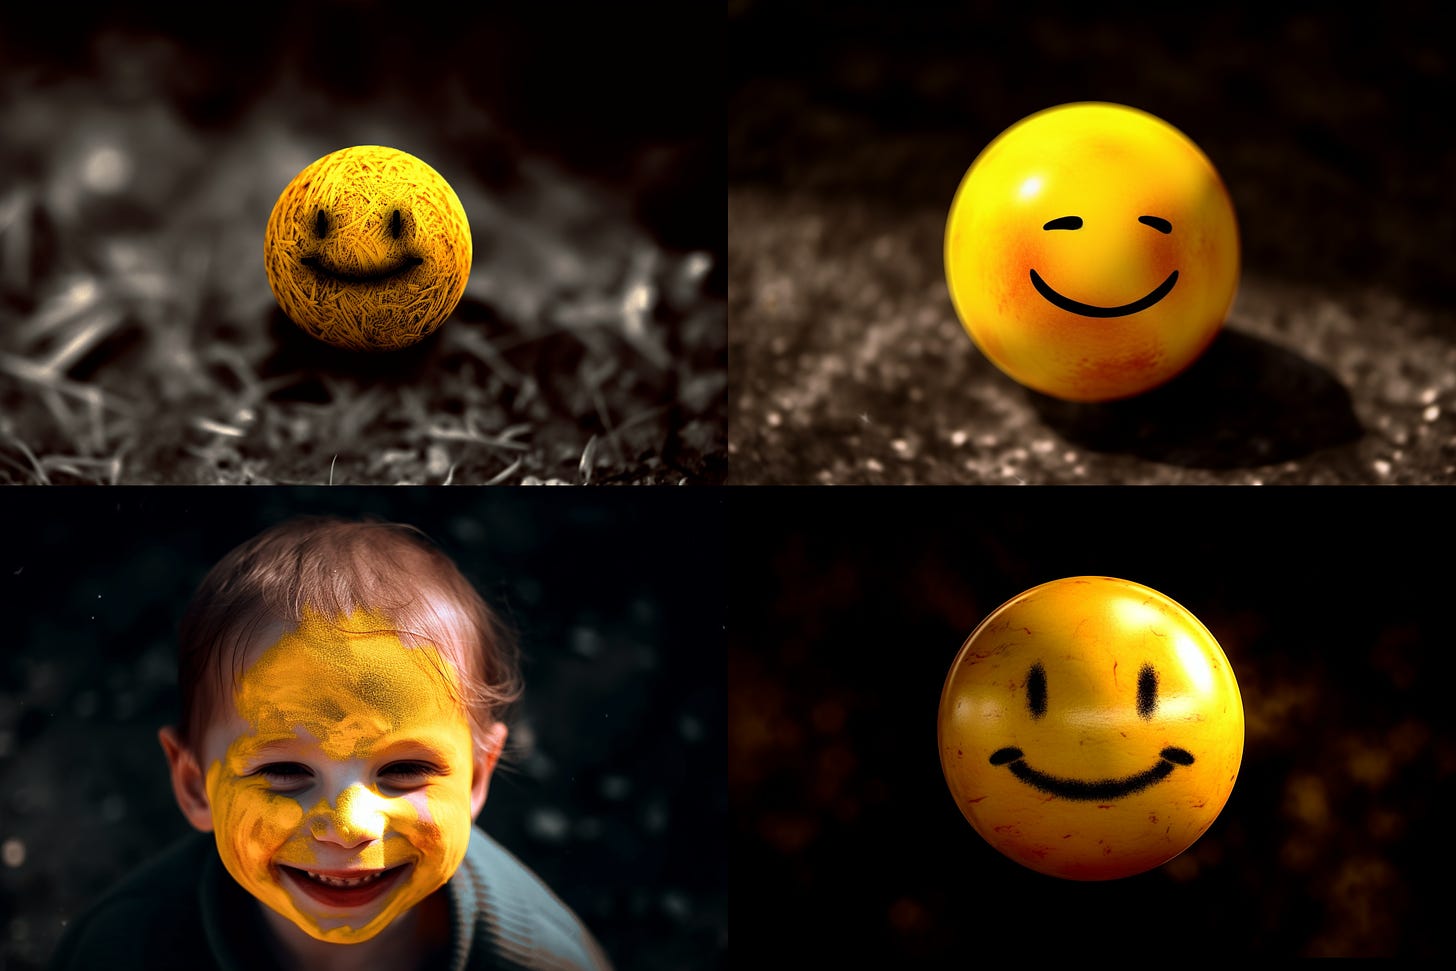 MJ V5 image grid where "happy face" is prioritized